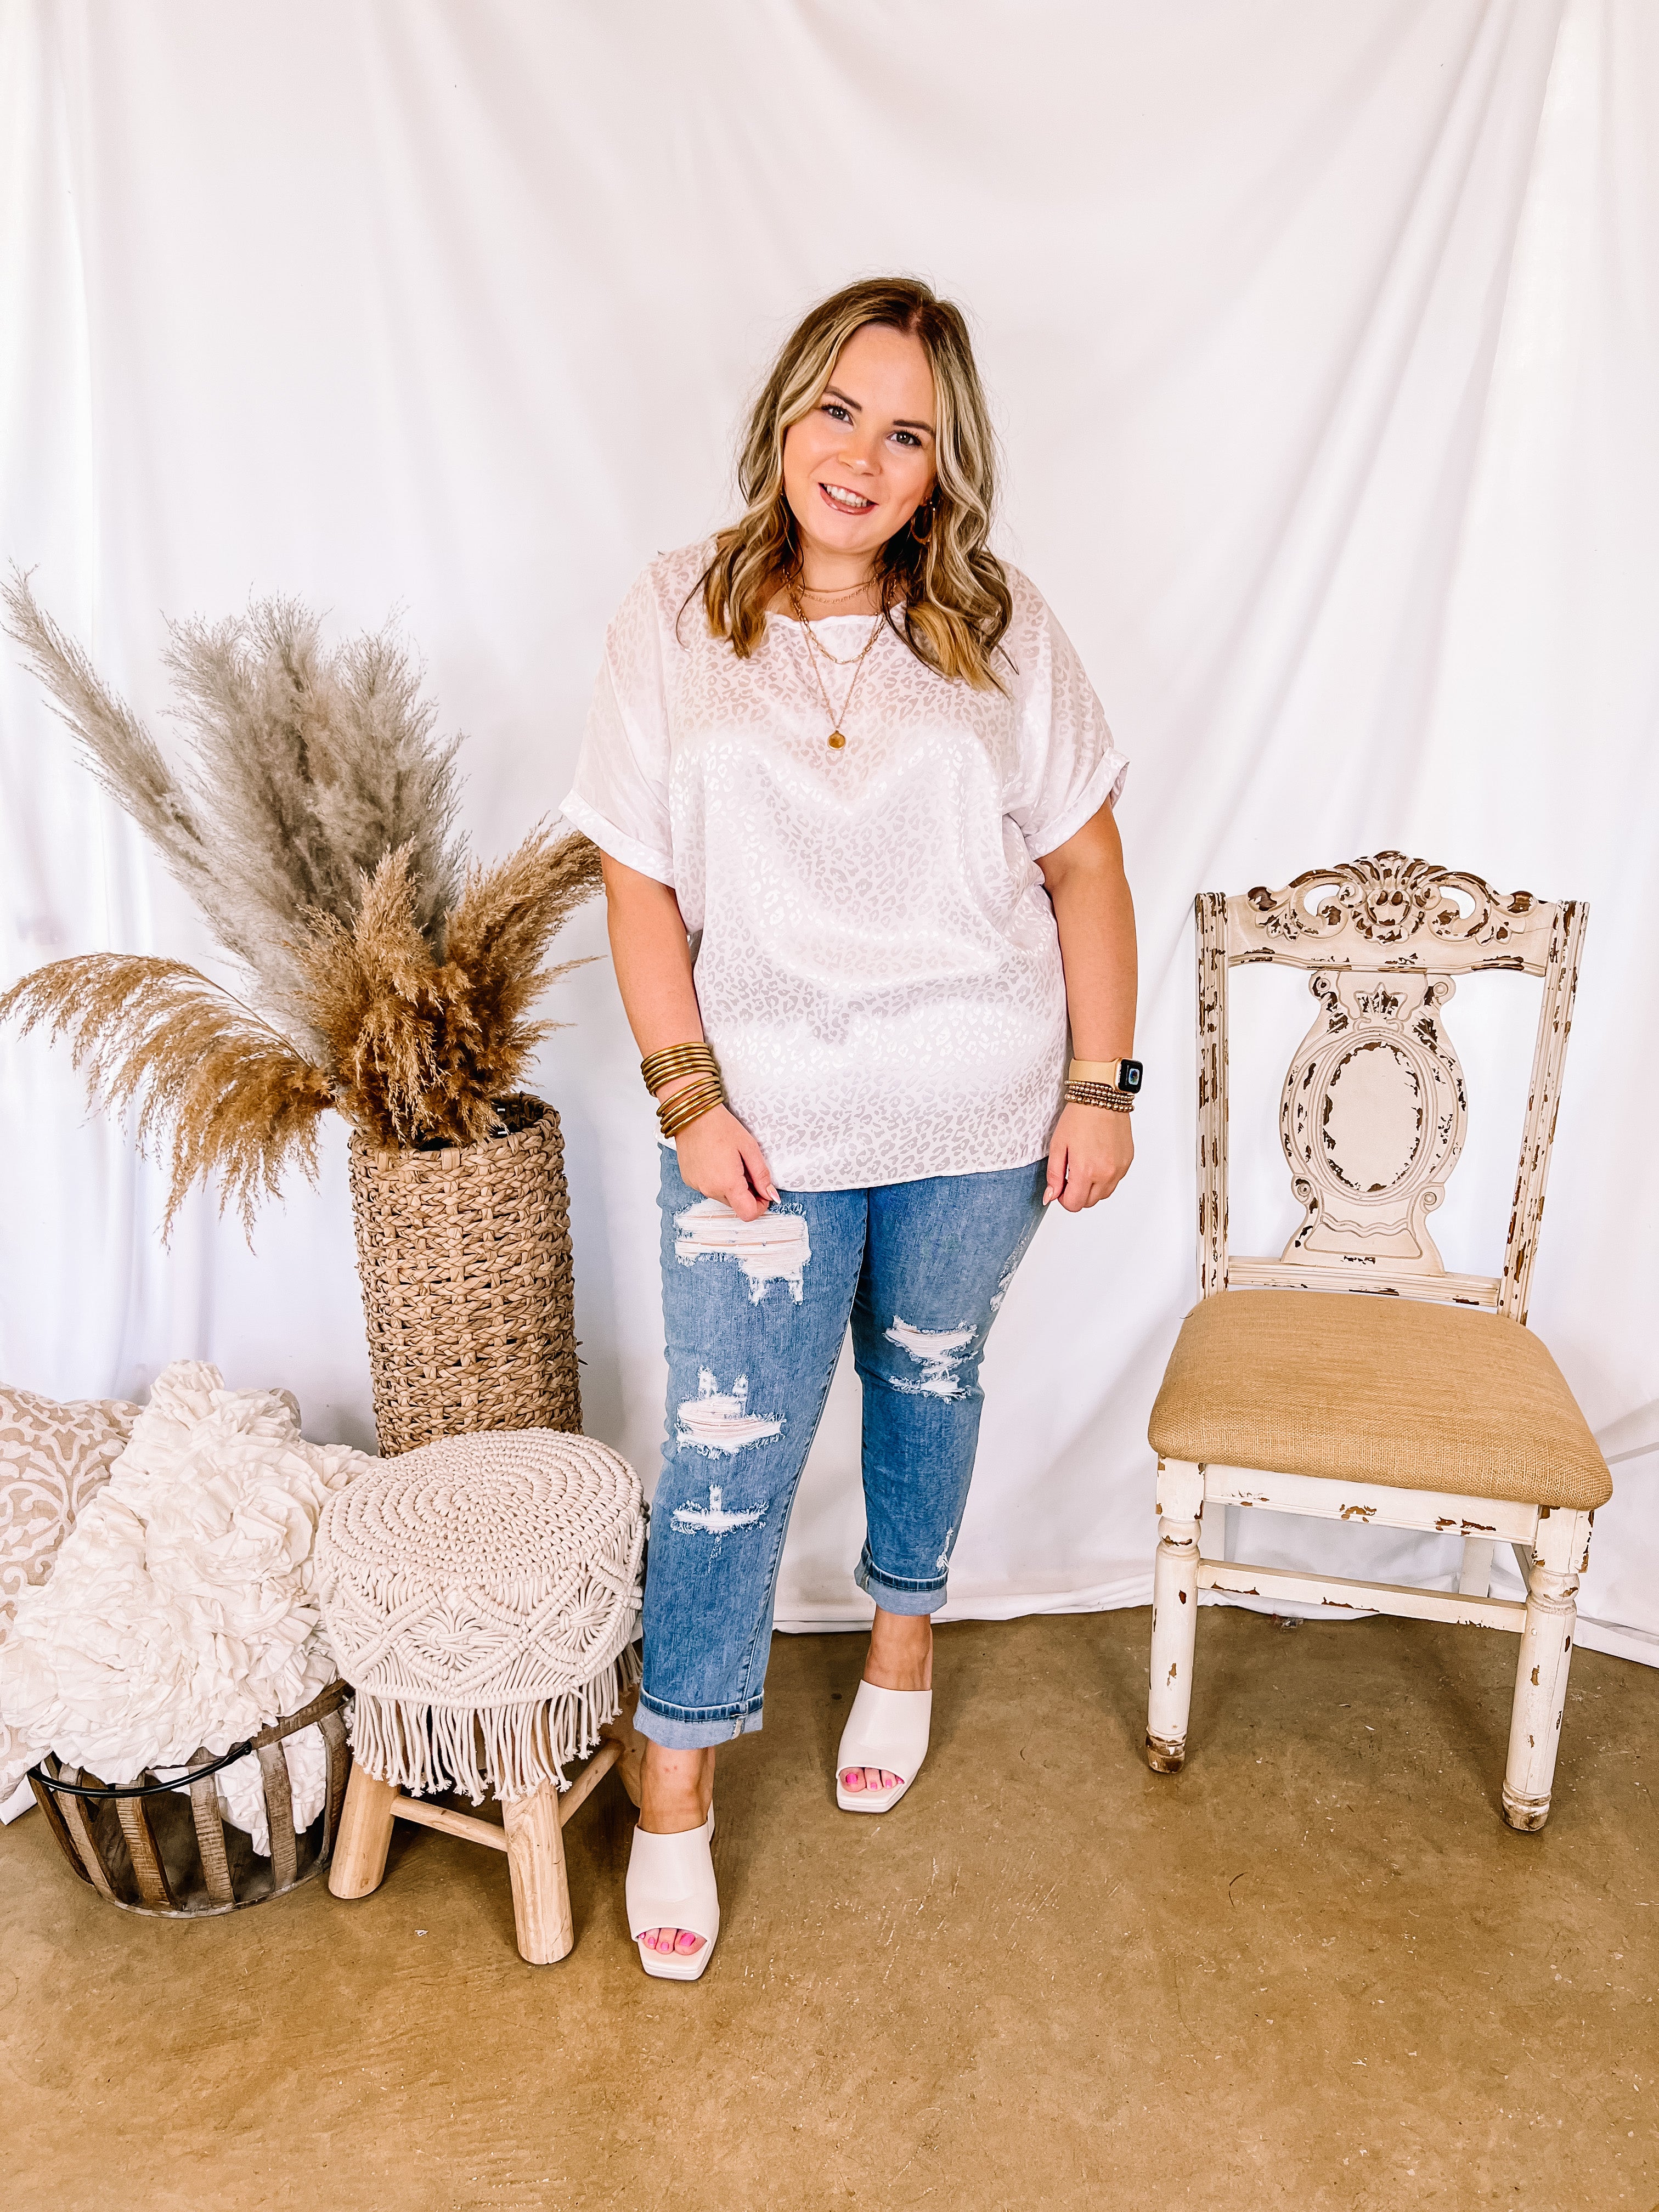 Complete Awe Short Sleeve Satin Leopard Print Top in White - Giddy Up Glamour Boutique